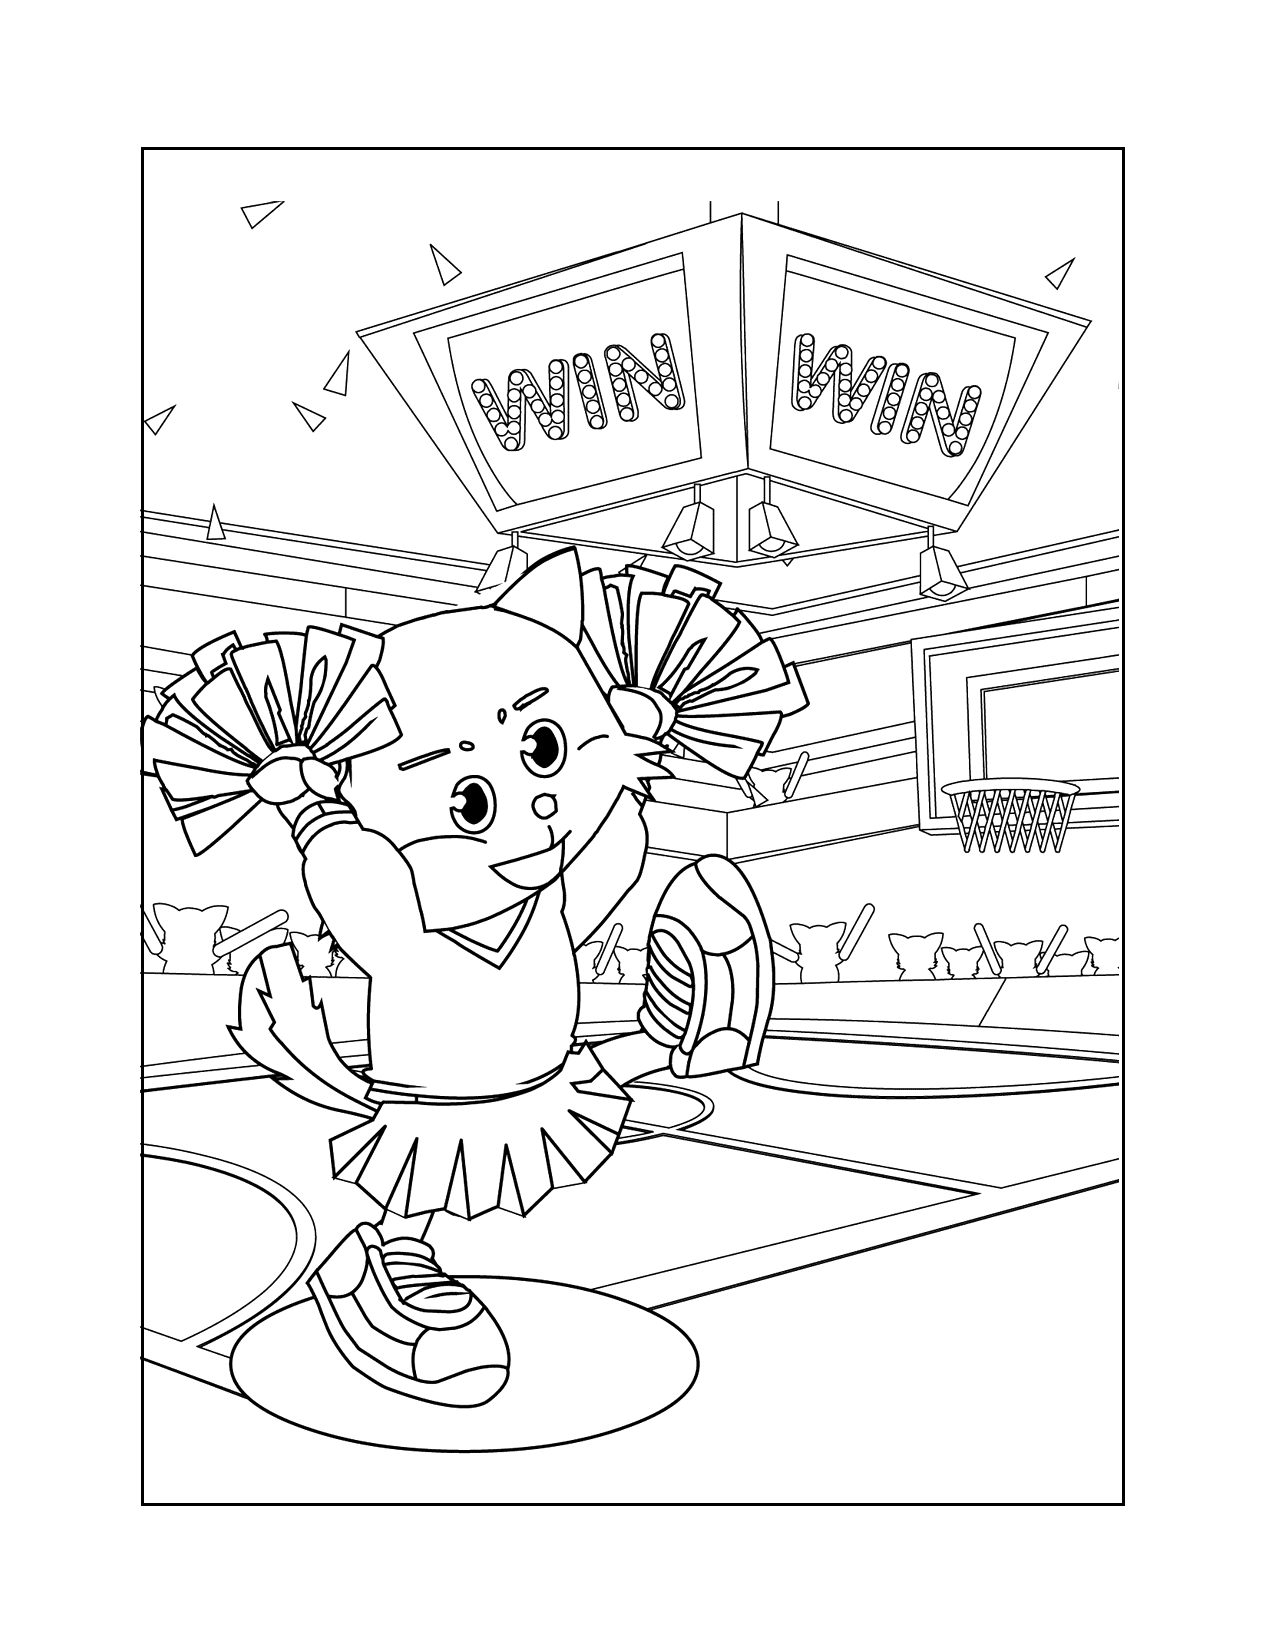 Cheerleader Cat Coloring Page